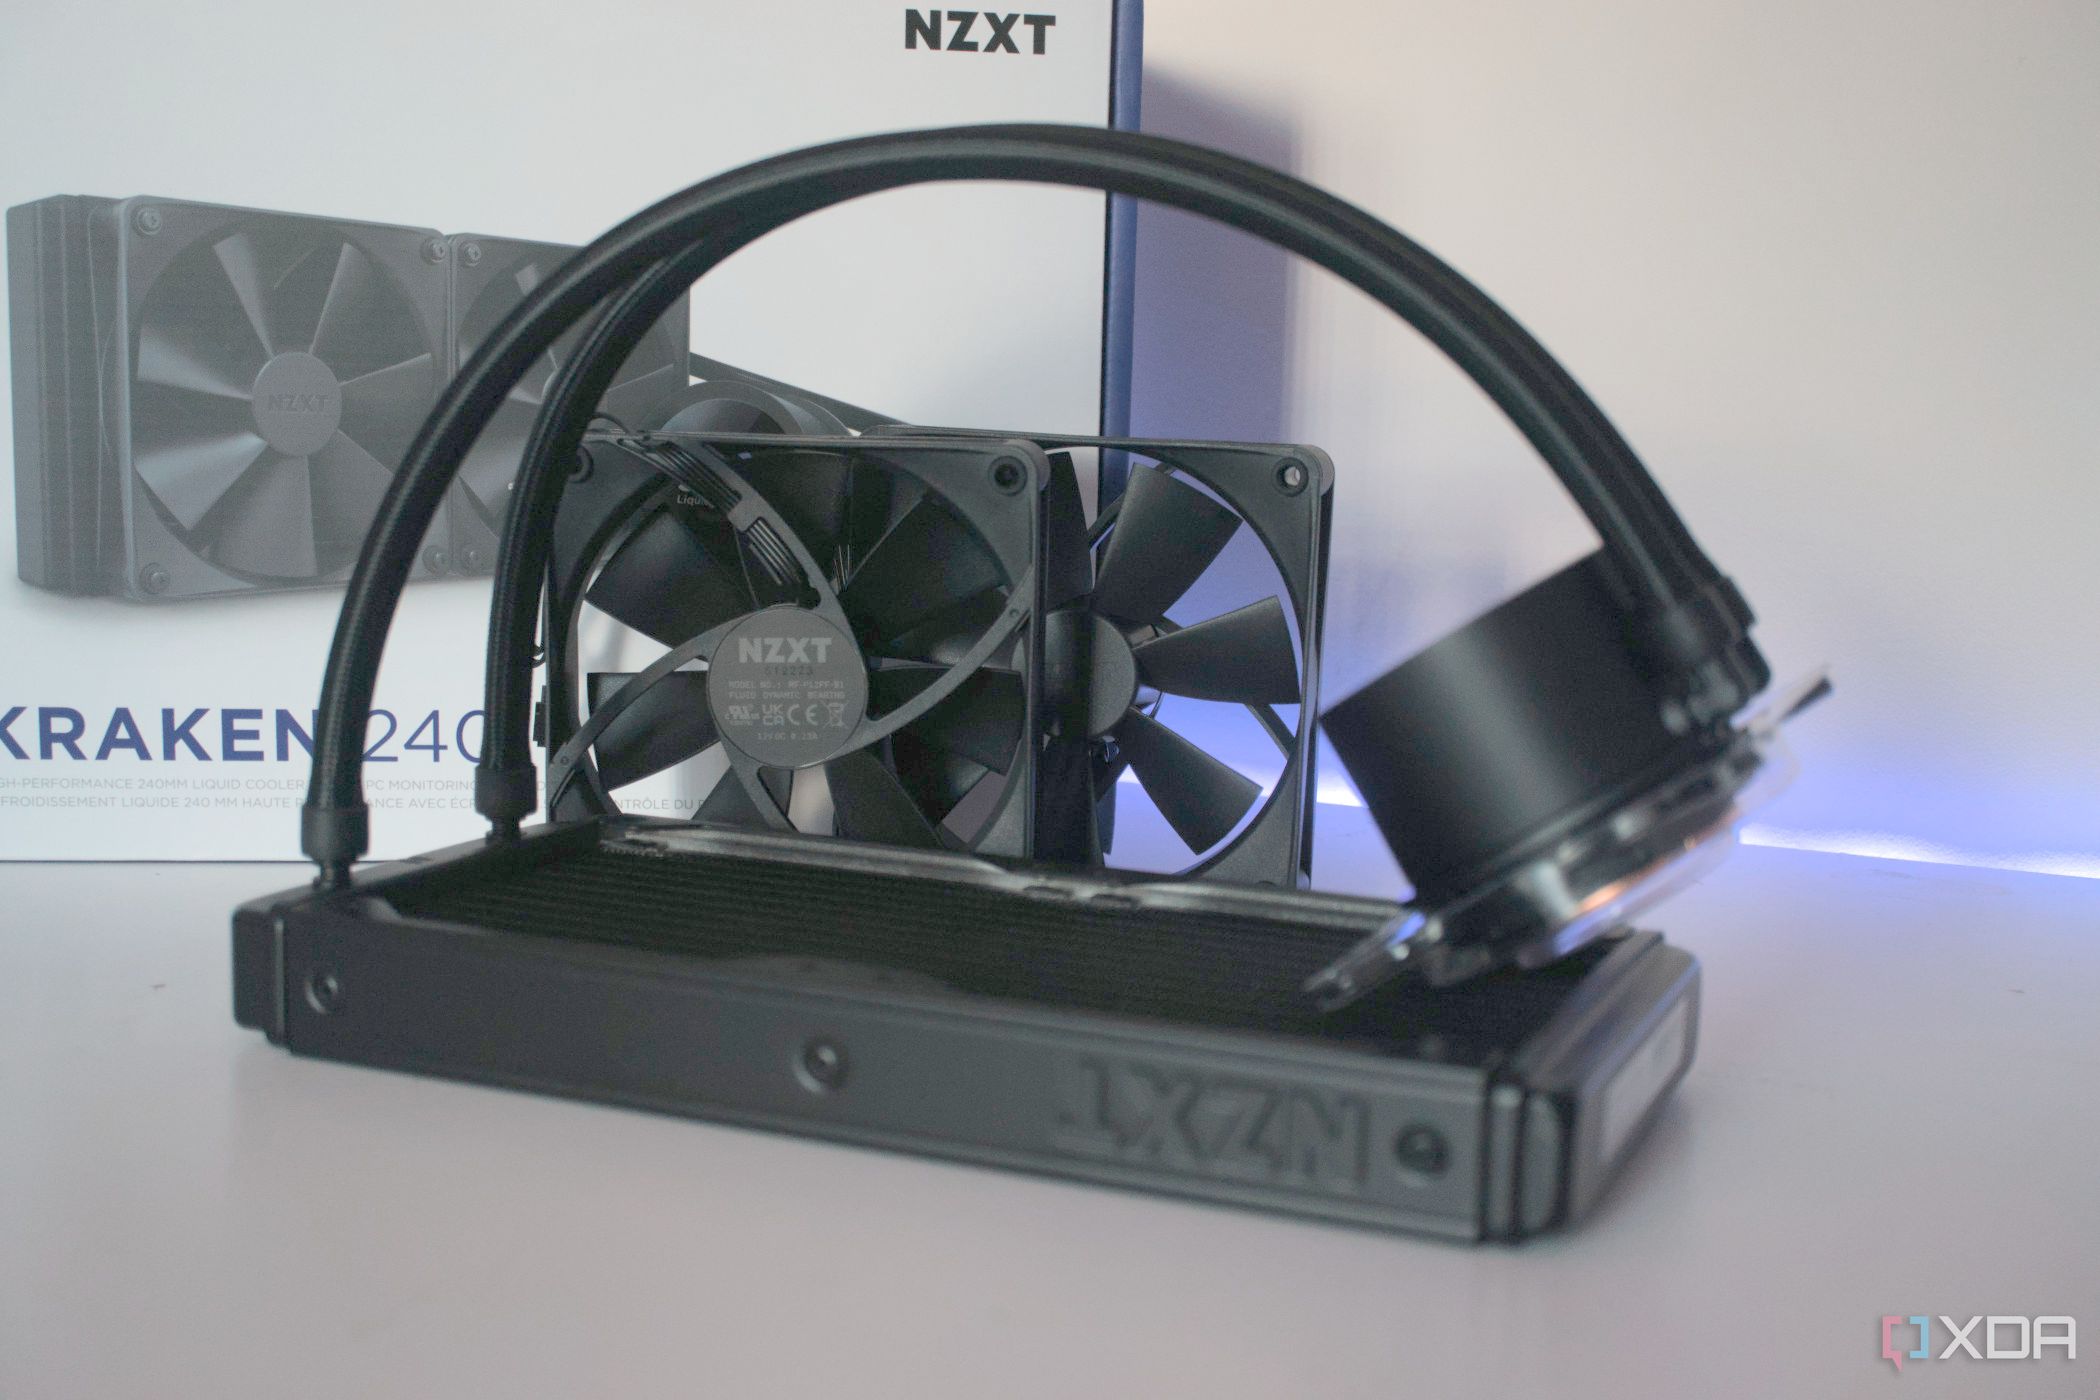 240 at Impressive reasonable review: price cooling Kraken NZXT performance a